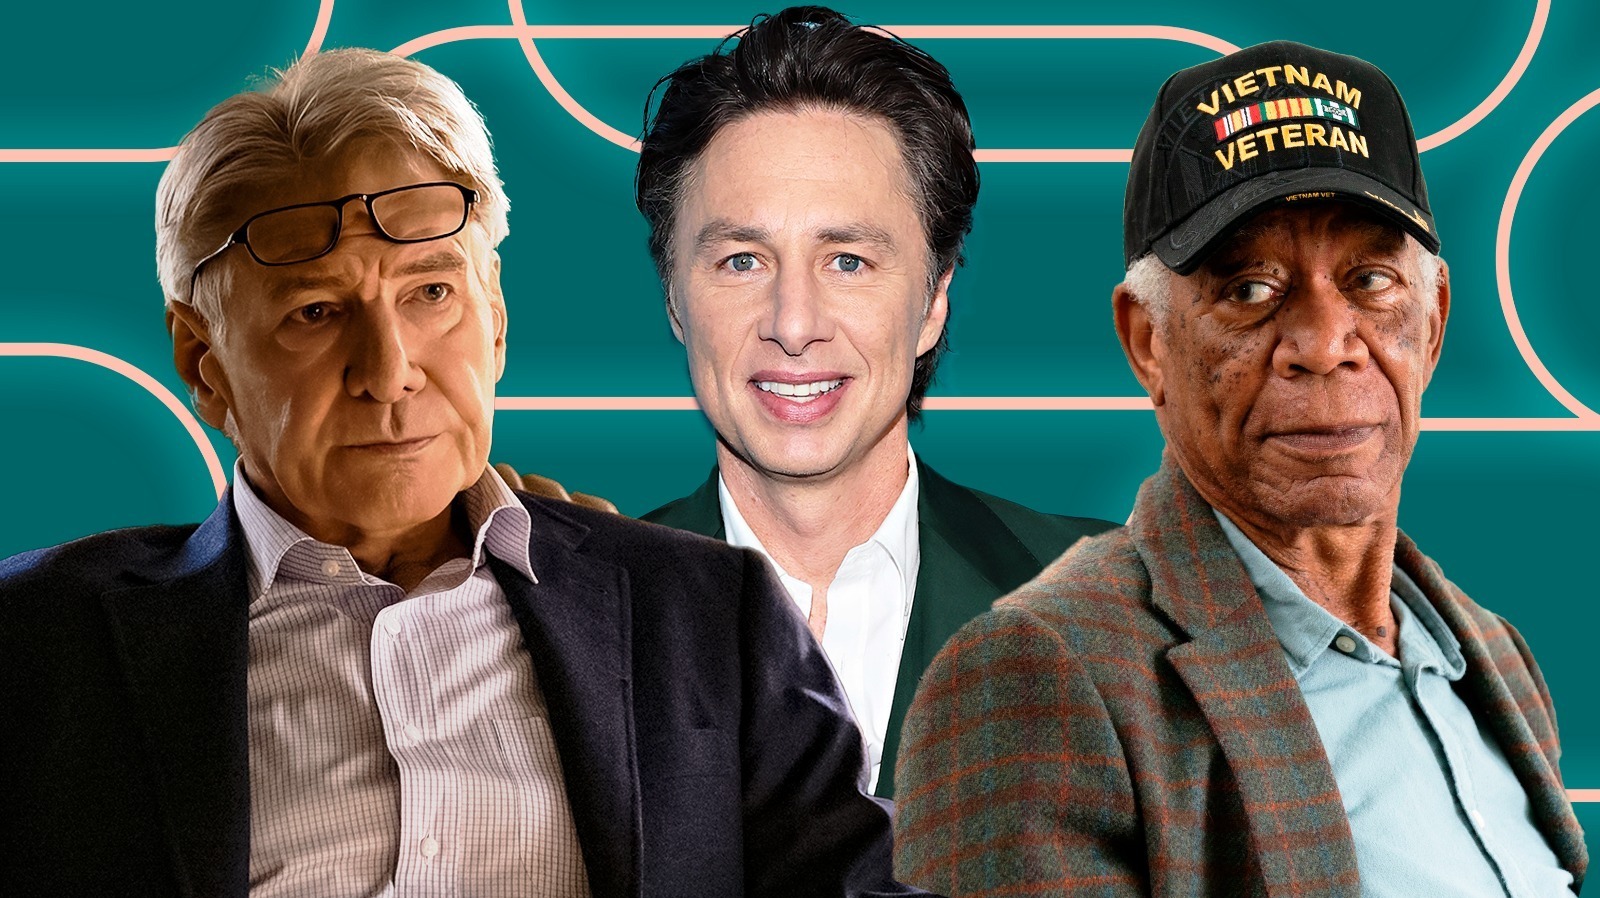 Zach Braff Figured Out The Secret To Directing Legends Like Morgan Freeman And Harrison Ford [Exclusive] 